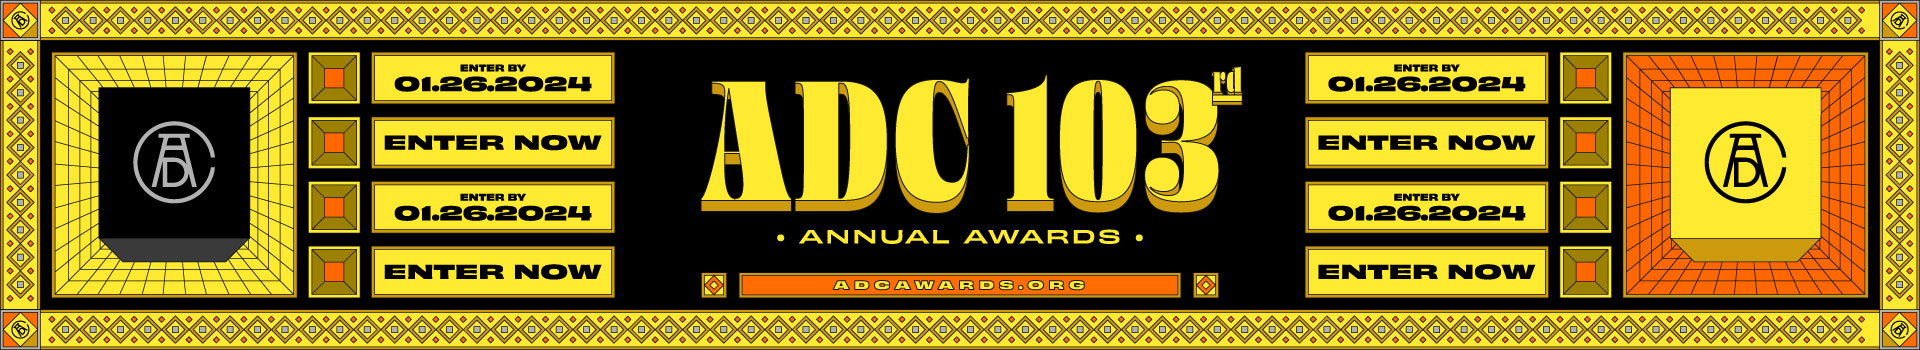 ADC 103 Call For Entries